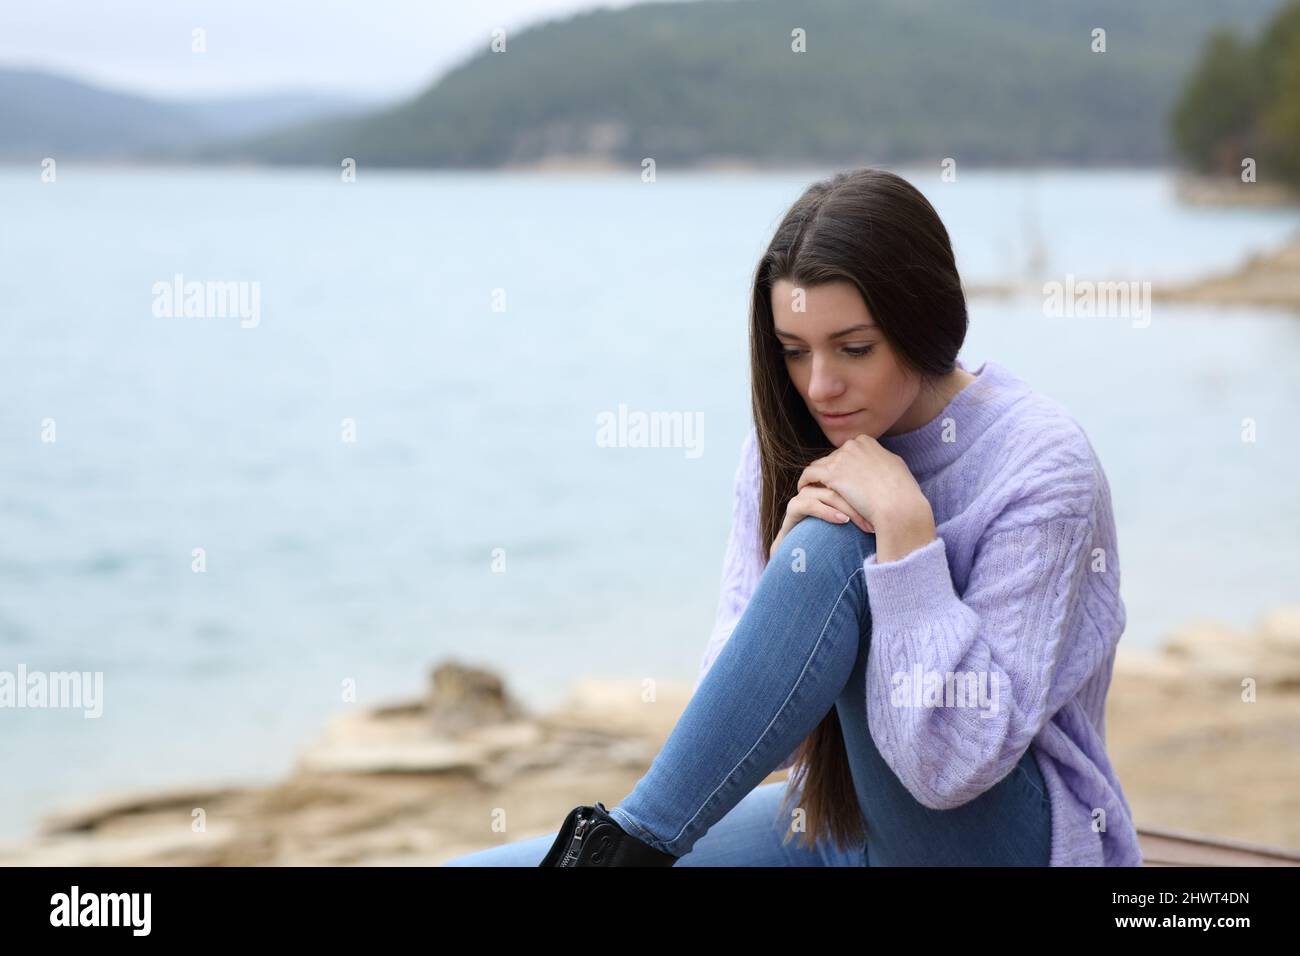 Sad pensive teen looking down sitting in a lake a cloudy day Stock Photo